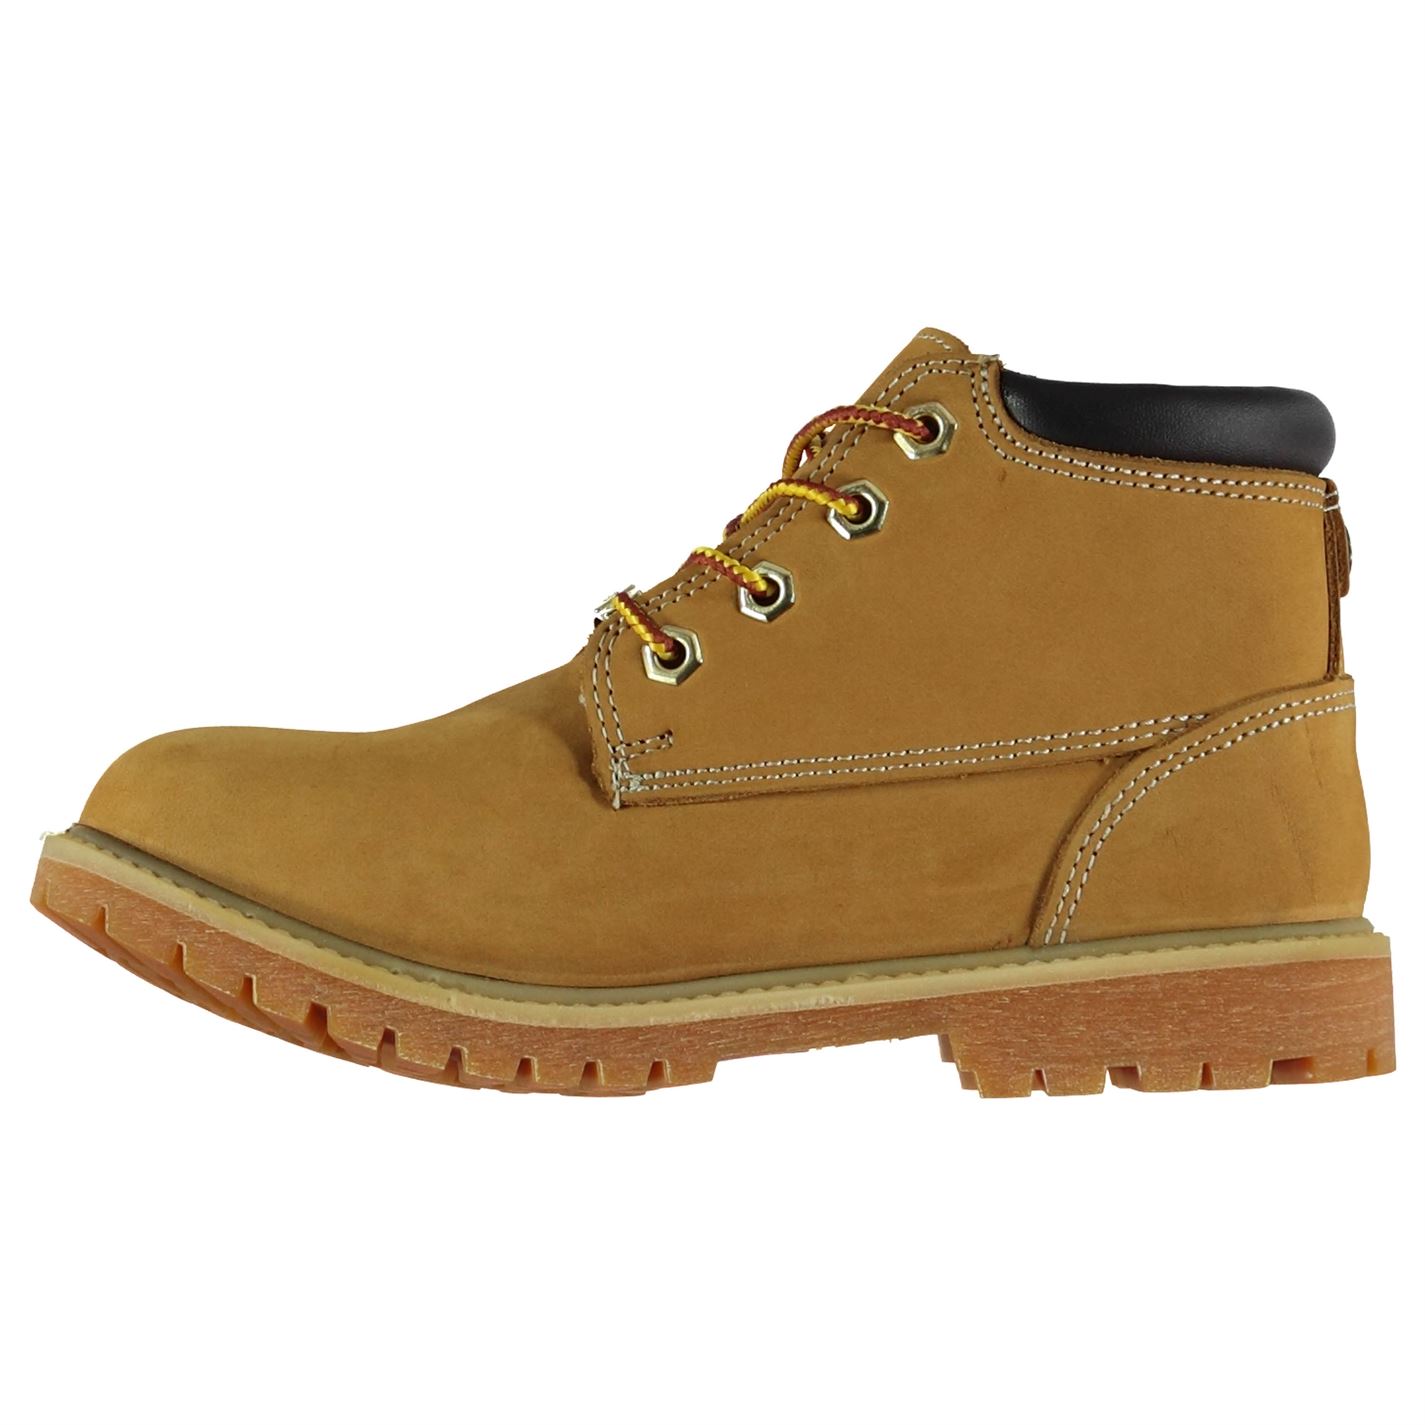 Firetrap Merlin Boots Ladies Rugged Water Repellent Leather Upper | eBay